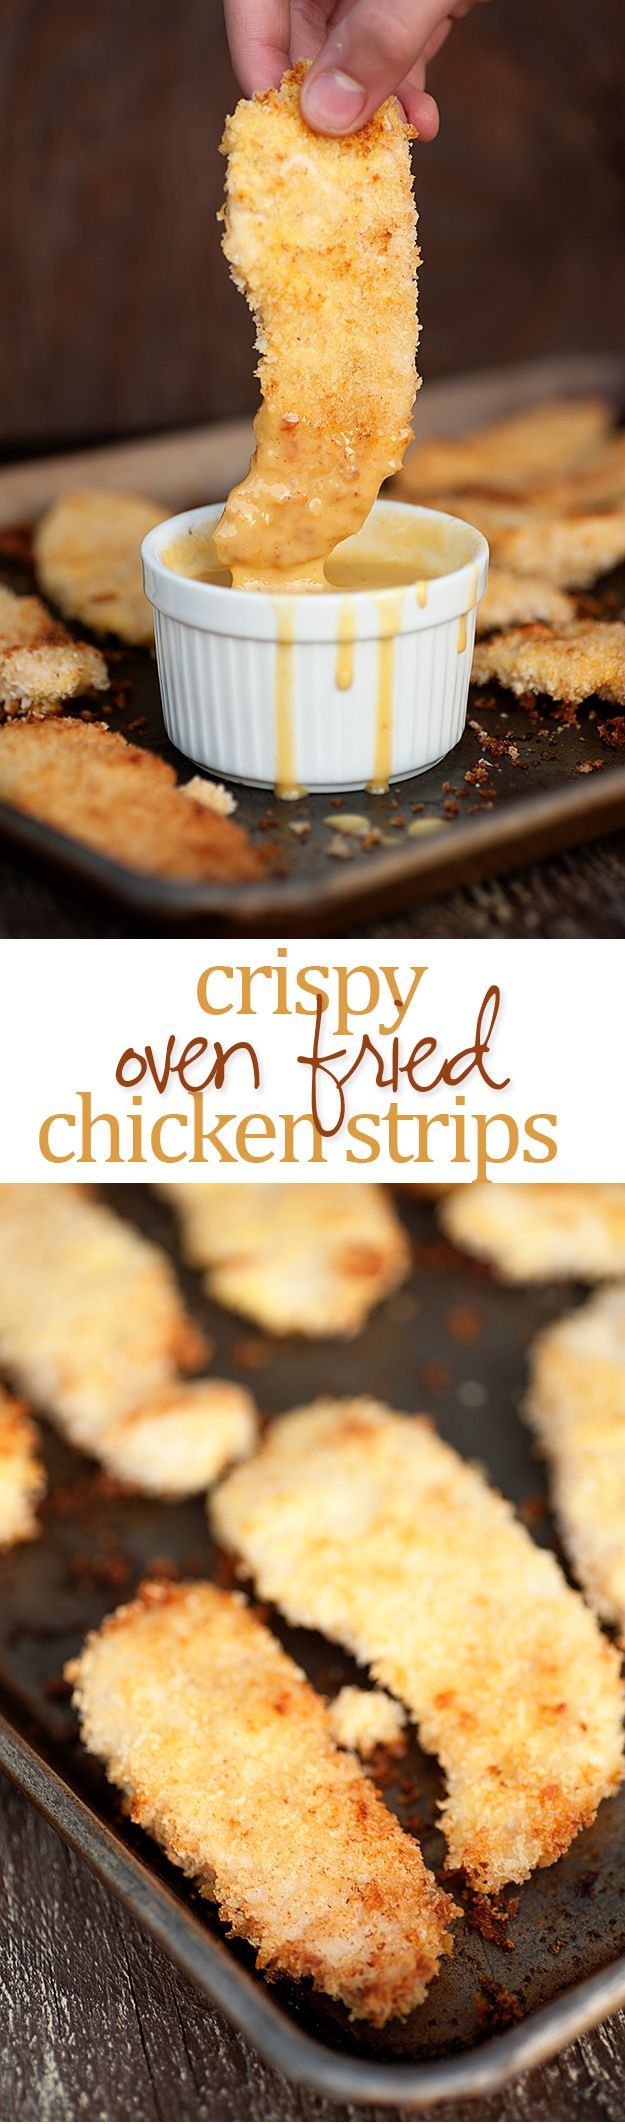 Oven Fried Chicken Strips